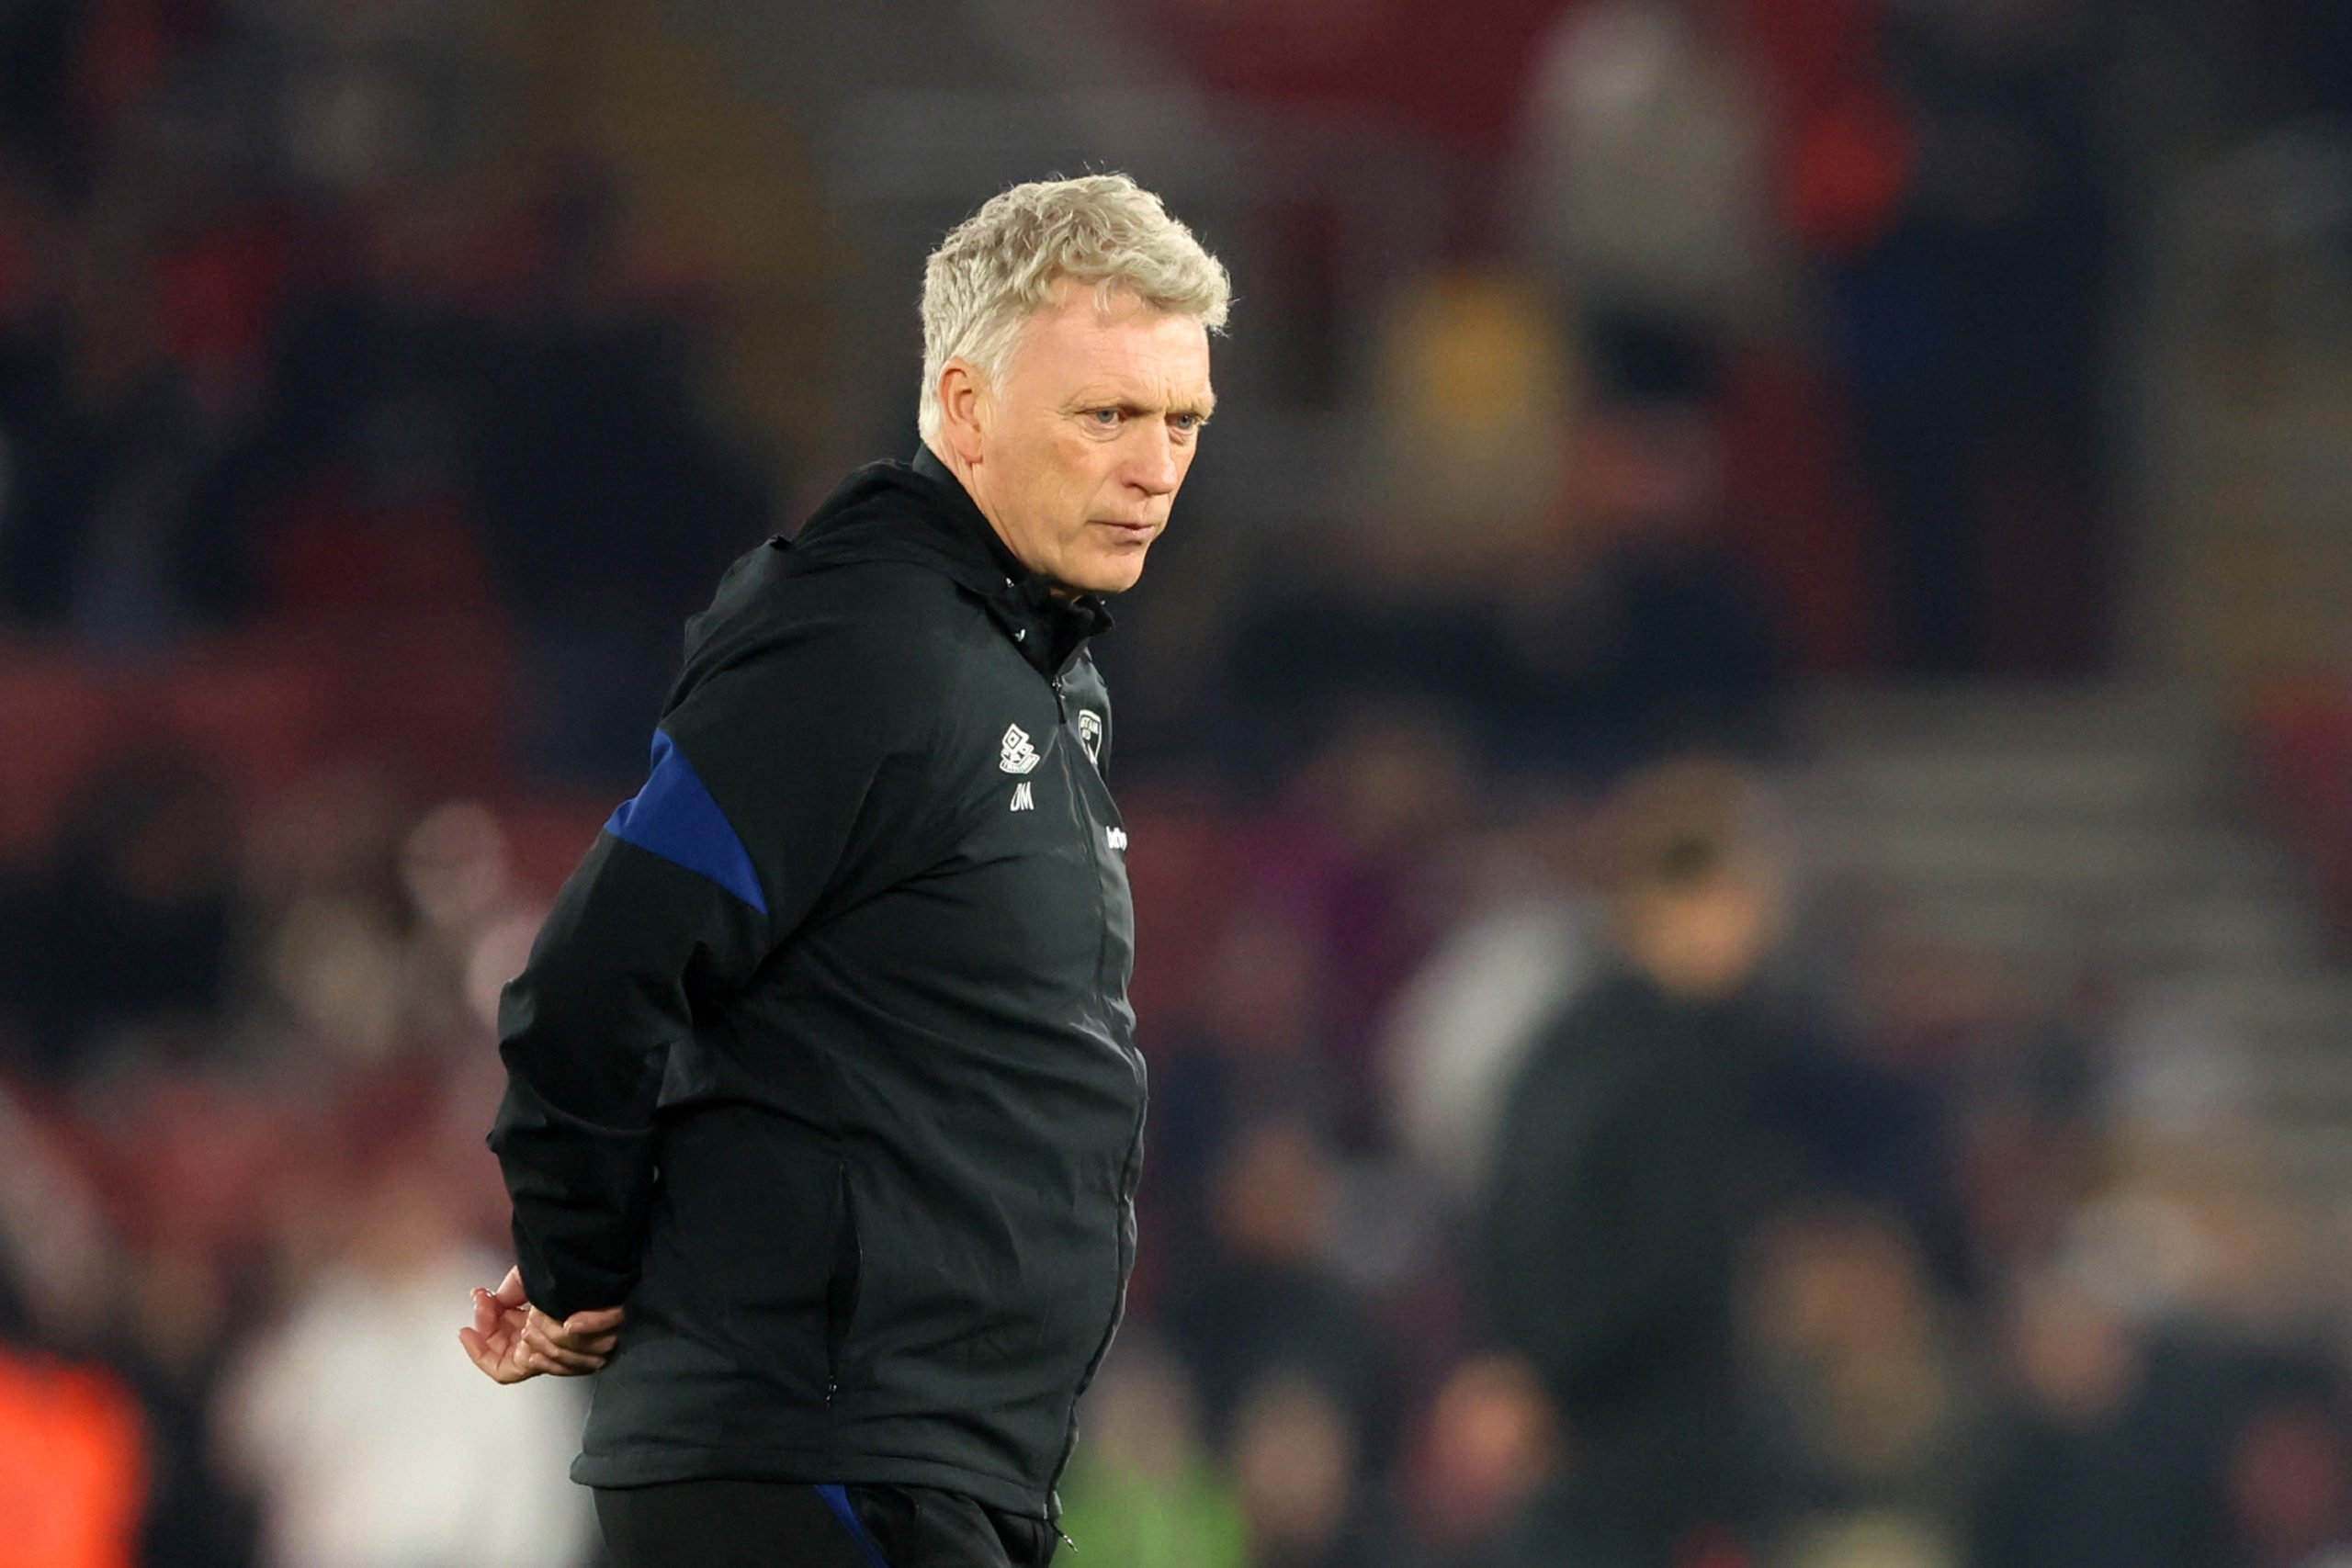 David Moyes says 25-year-old West Ham man was 'as good as anyone' during FA Cup defeat to Southampton